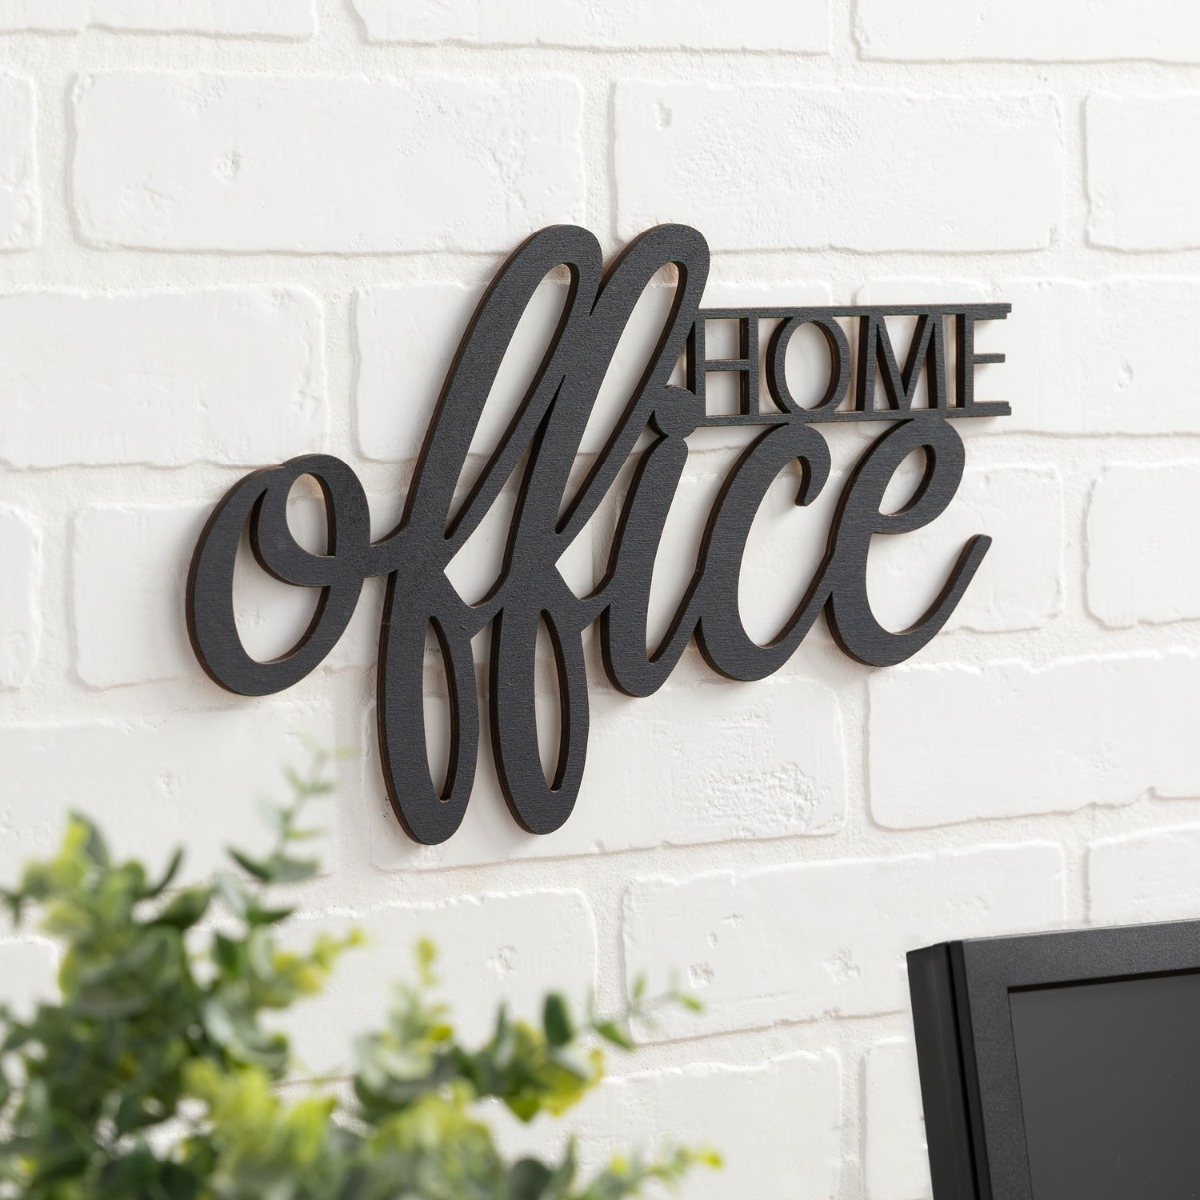 Home Office Black Wood Plaque 